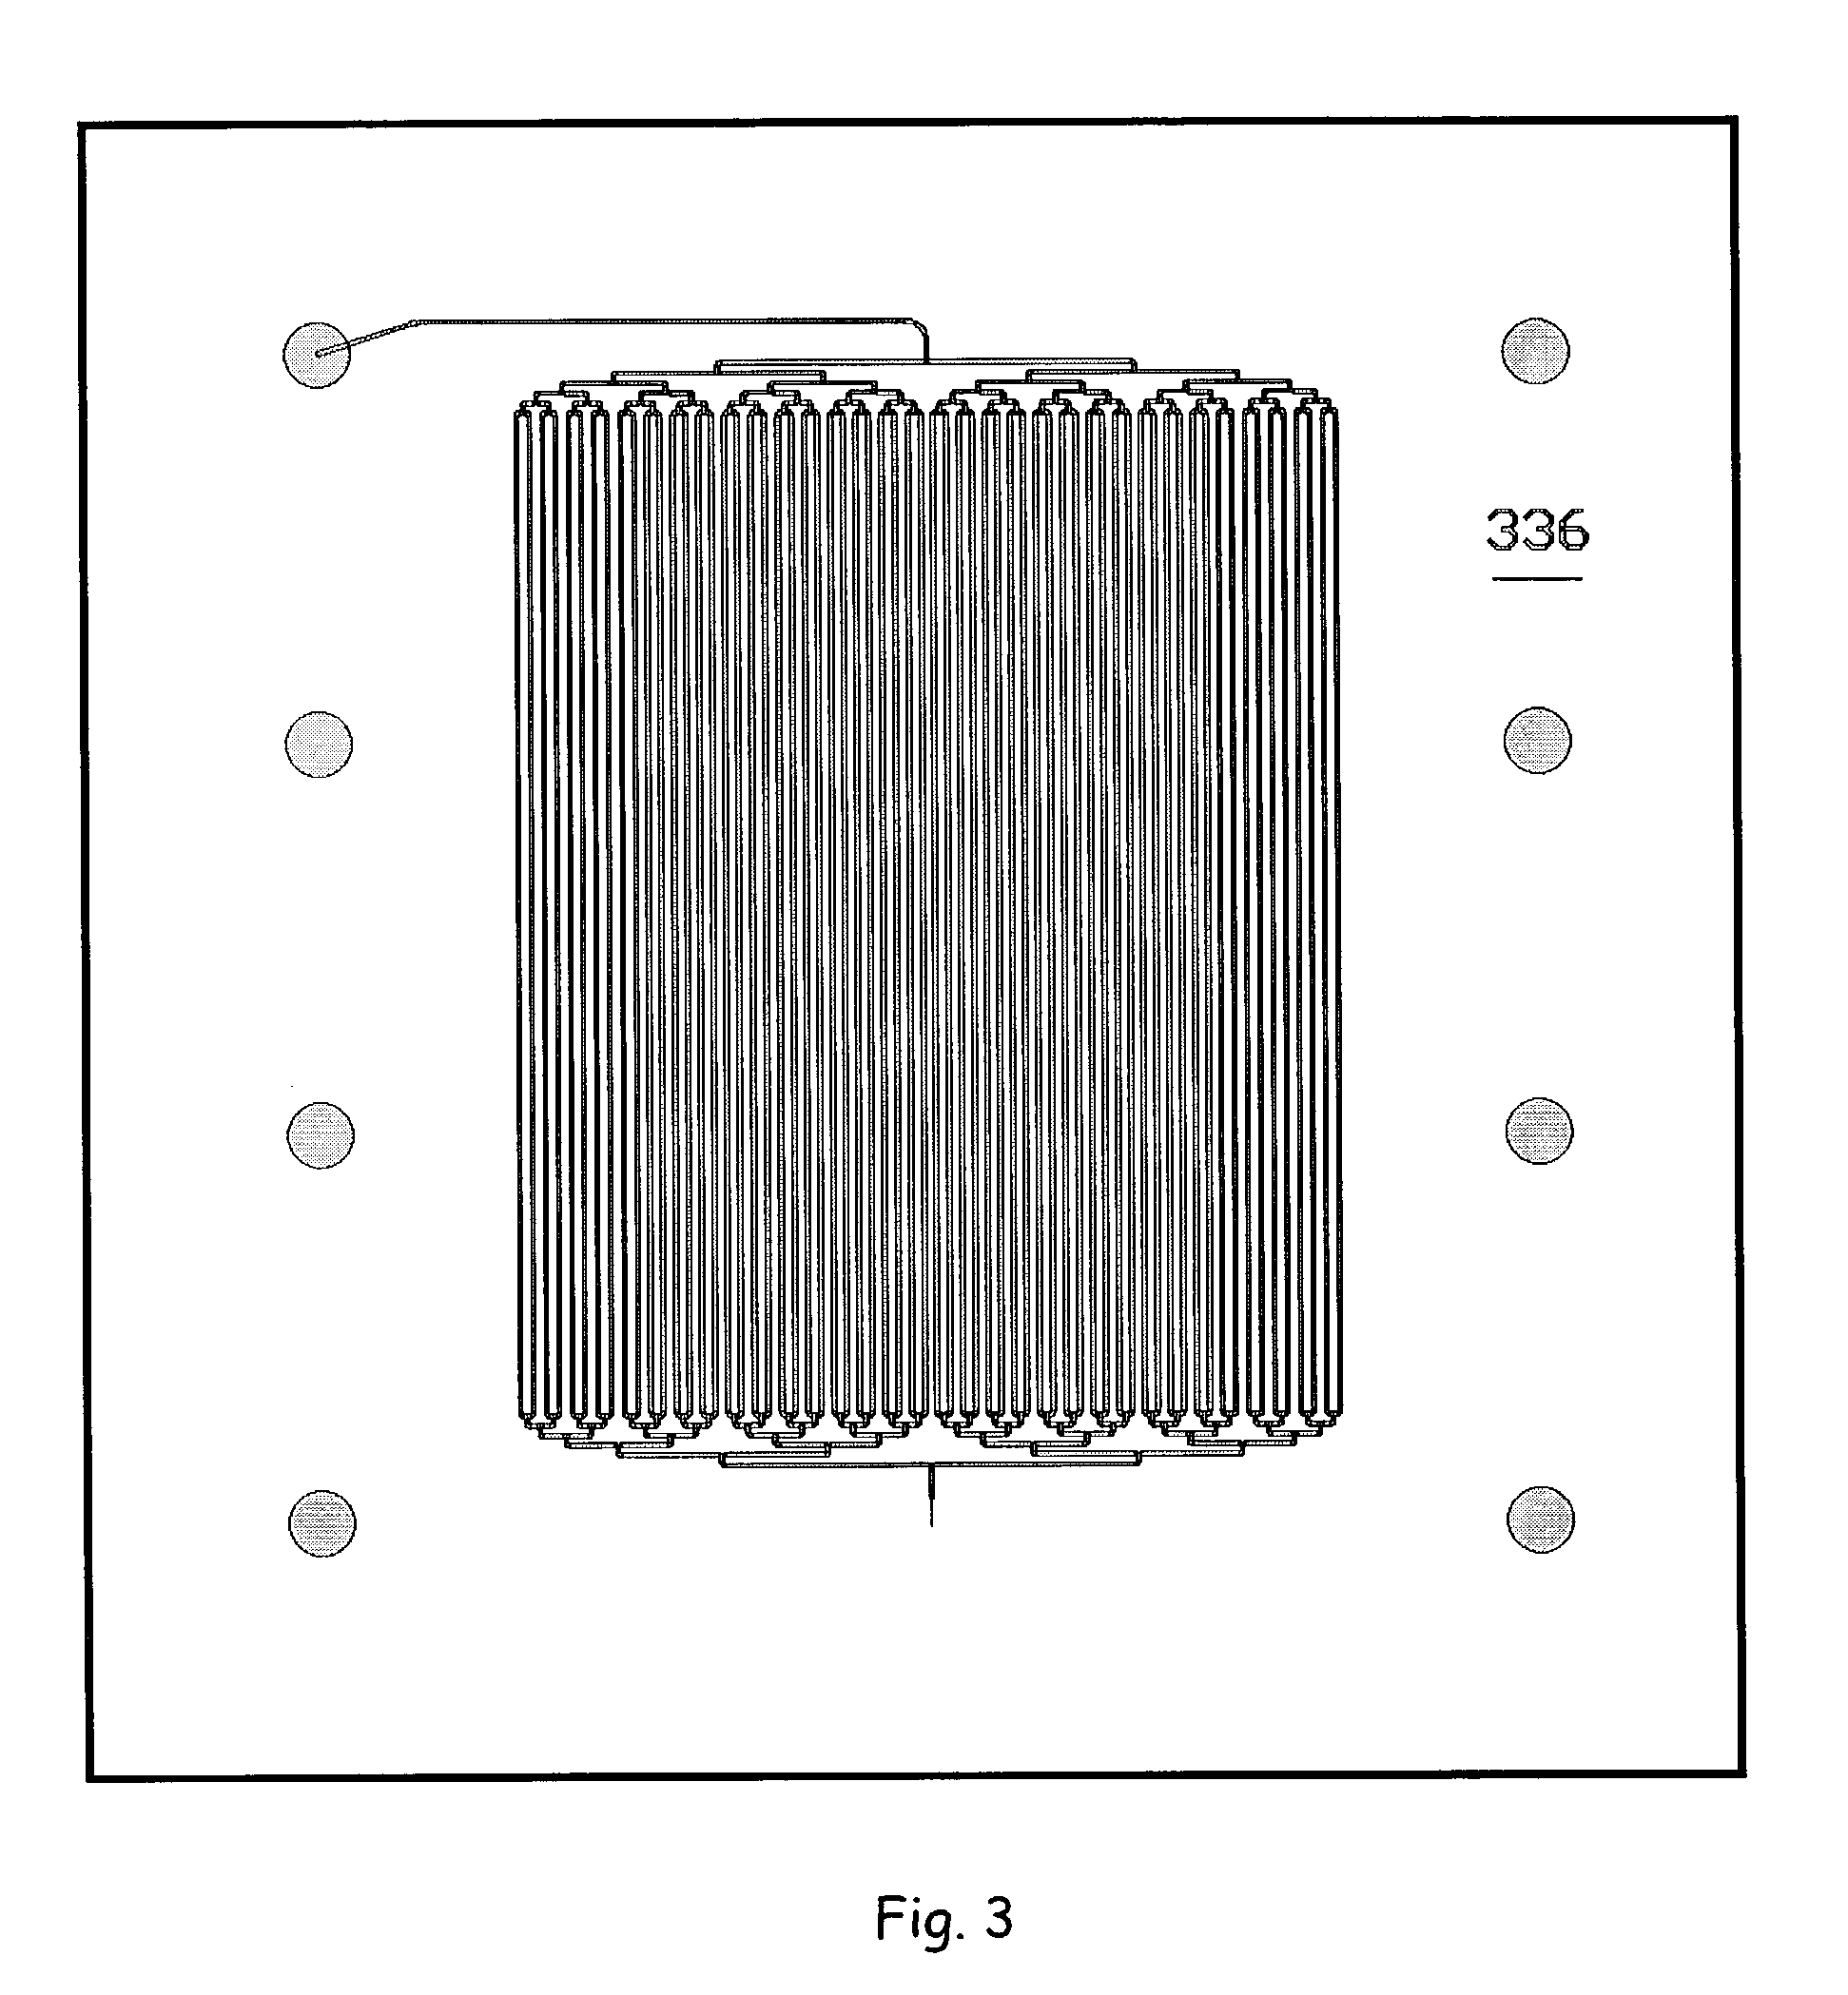 Microfluidic sample delivery devices, systems, and methods